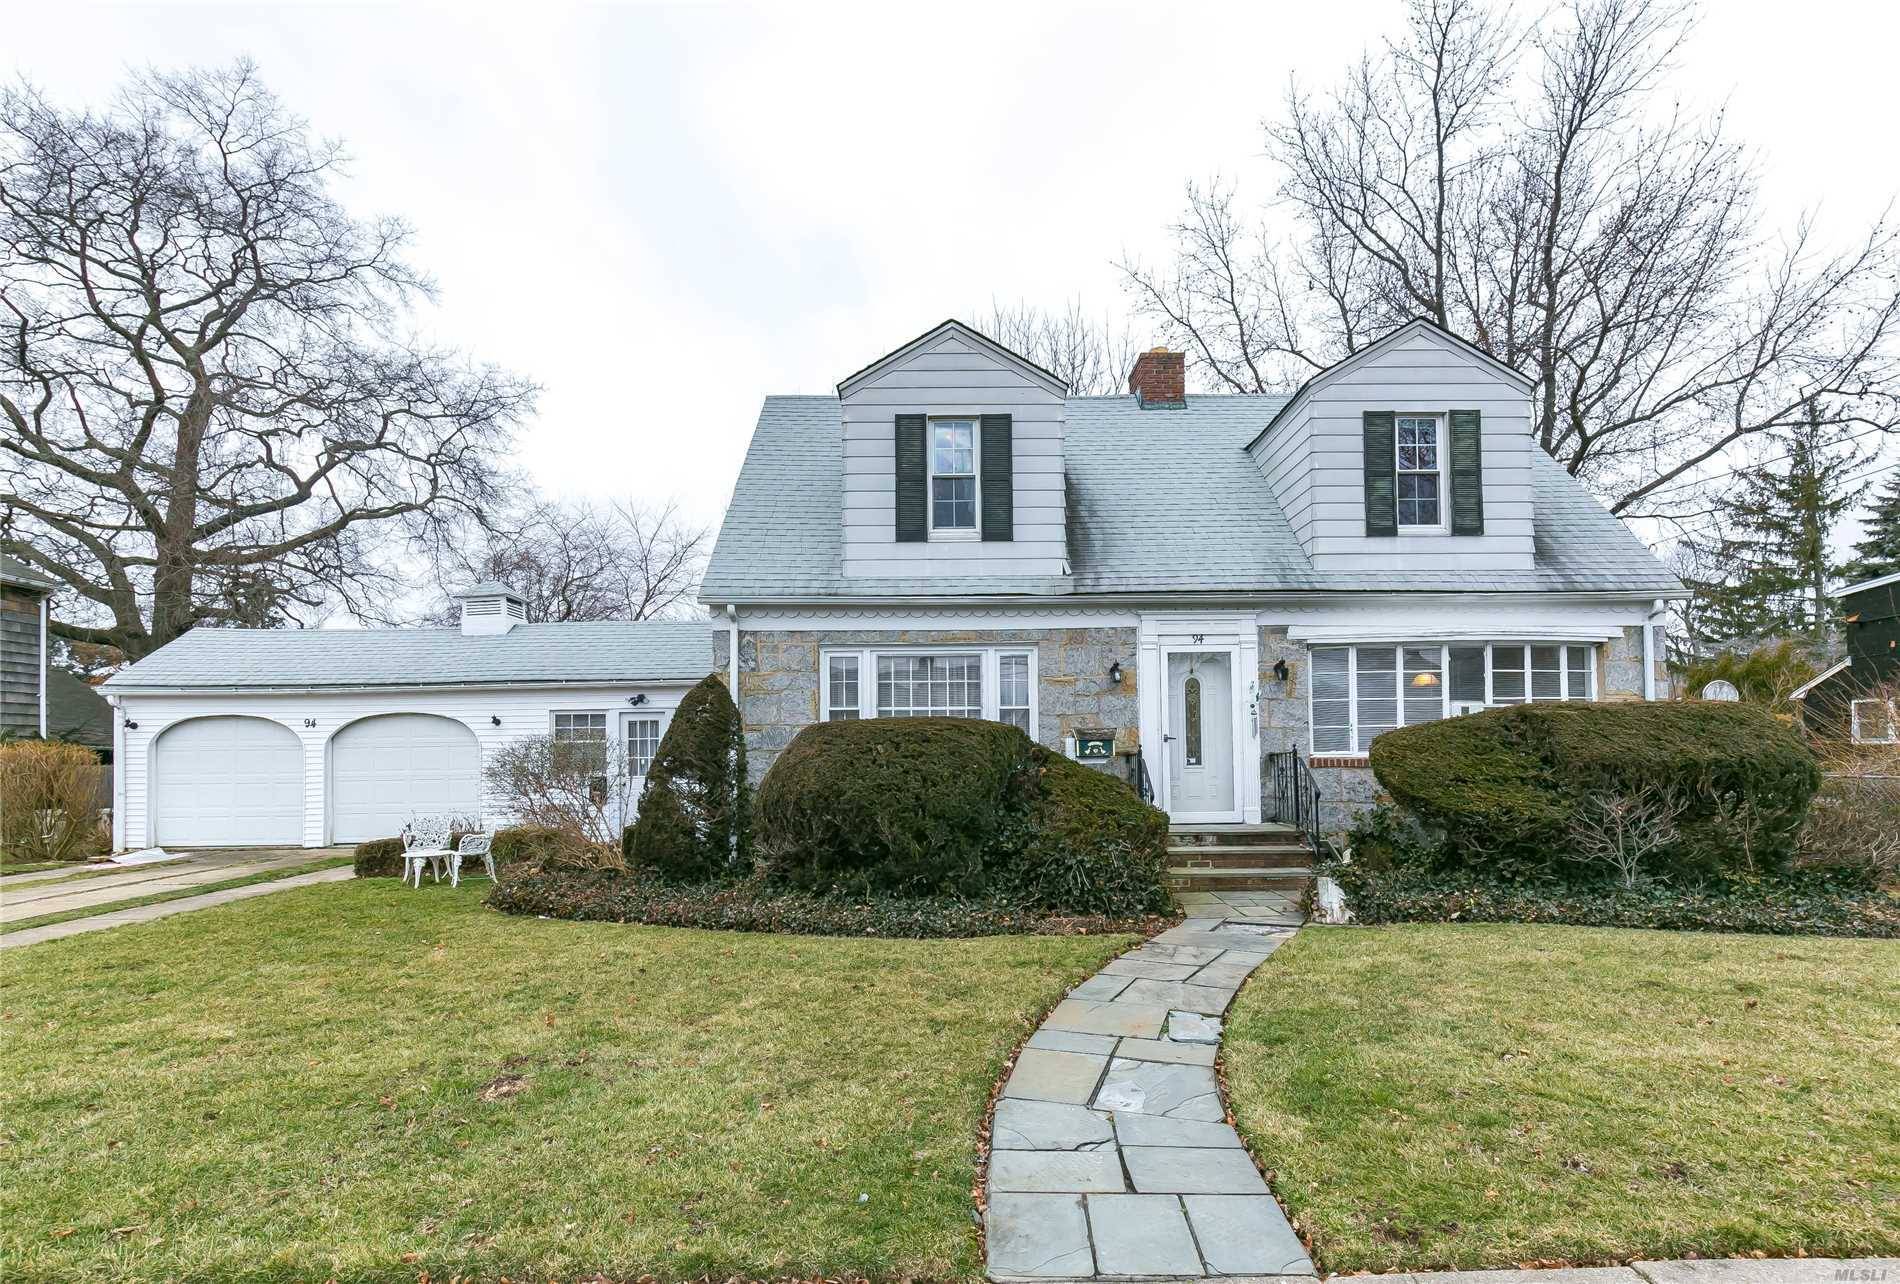 Welcome Home To This Captivating, Turn Key Center Hall Colonial, Set On 10, 000 Sqft Of Well Maintained Land In The Heart Of Hicksville.